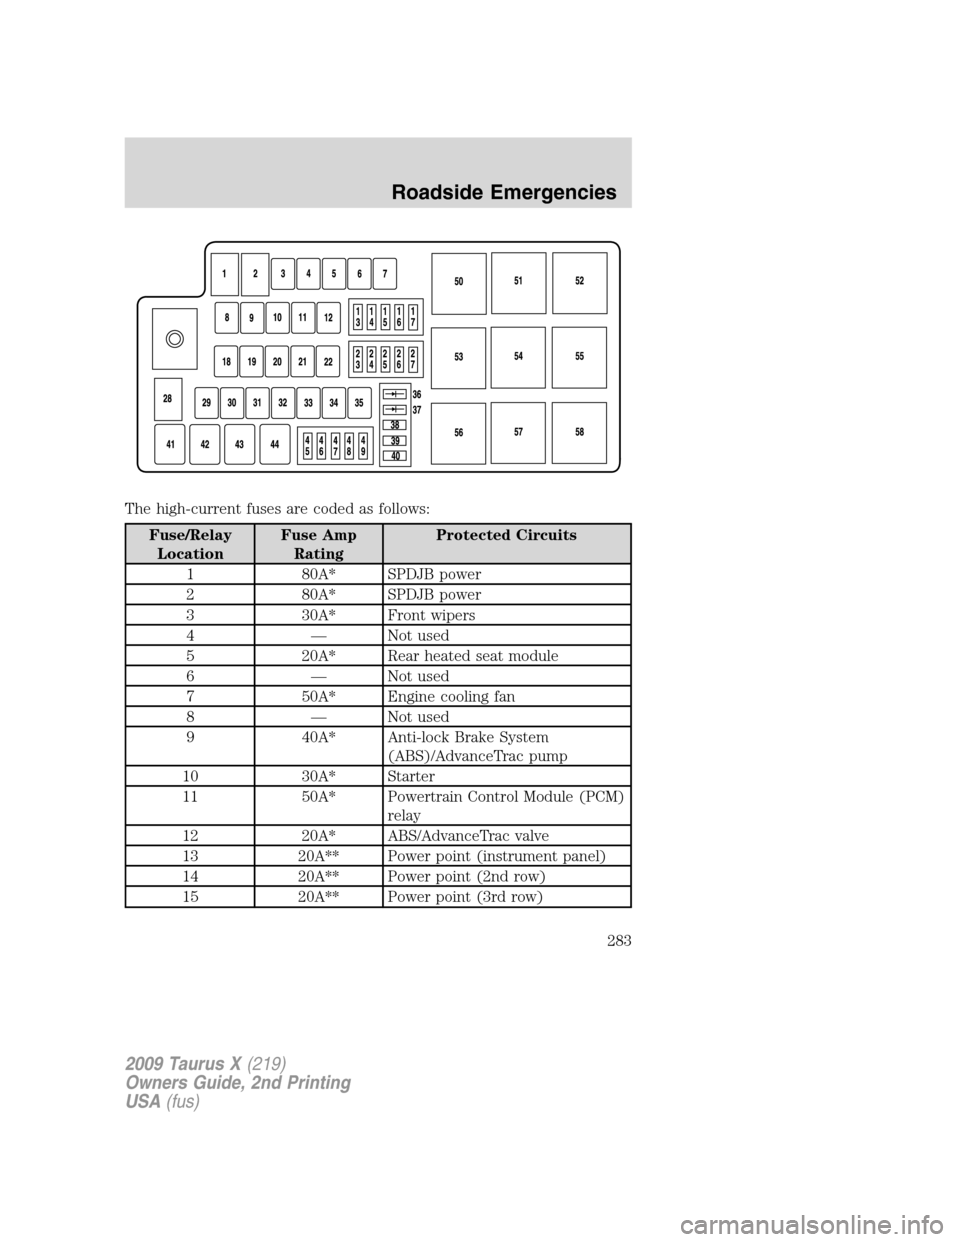 FORD TAURUS X 2009 1.G Service Manual The high-current fuses are coded as follows:
Fuse/Relay
LocationFuse Amp
RatingProtected Circuits
1 80A* SPDJB power
2 80A* SPDJB power
3 30A* Front wipers
4 — Not used
5 20A* Rear heated seat modul